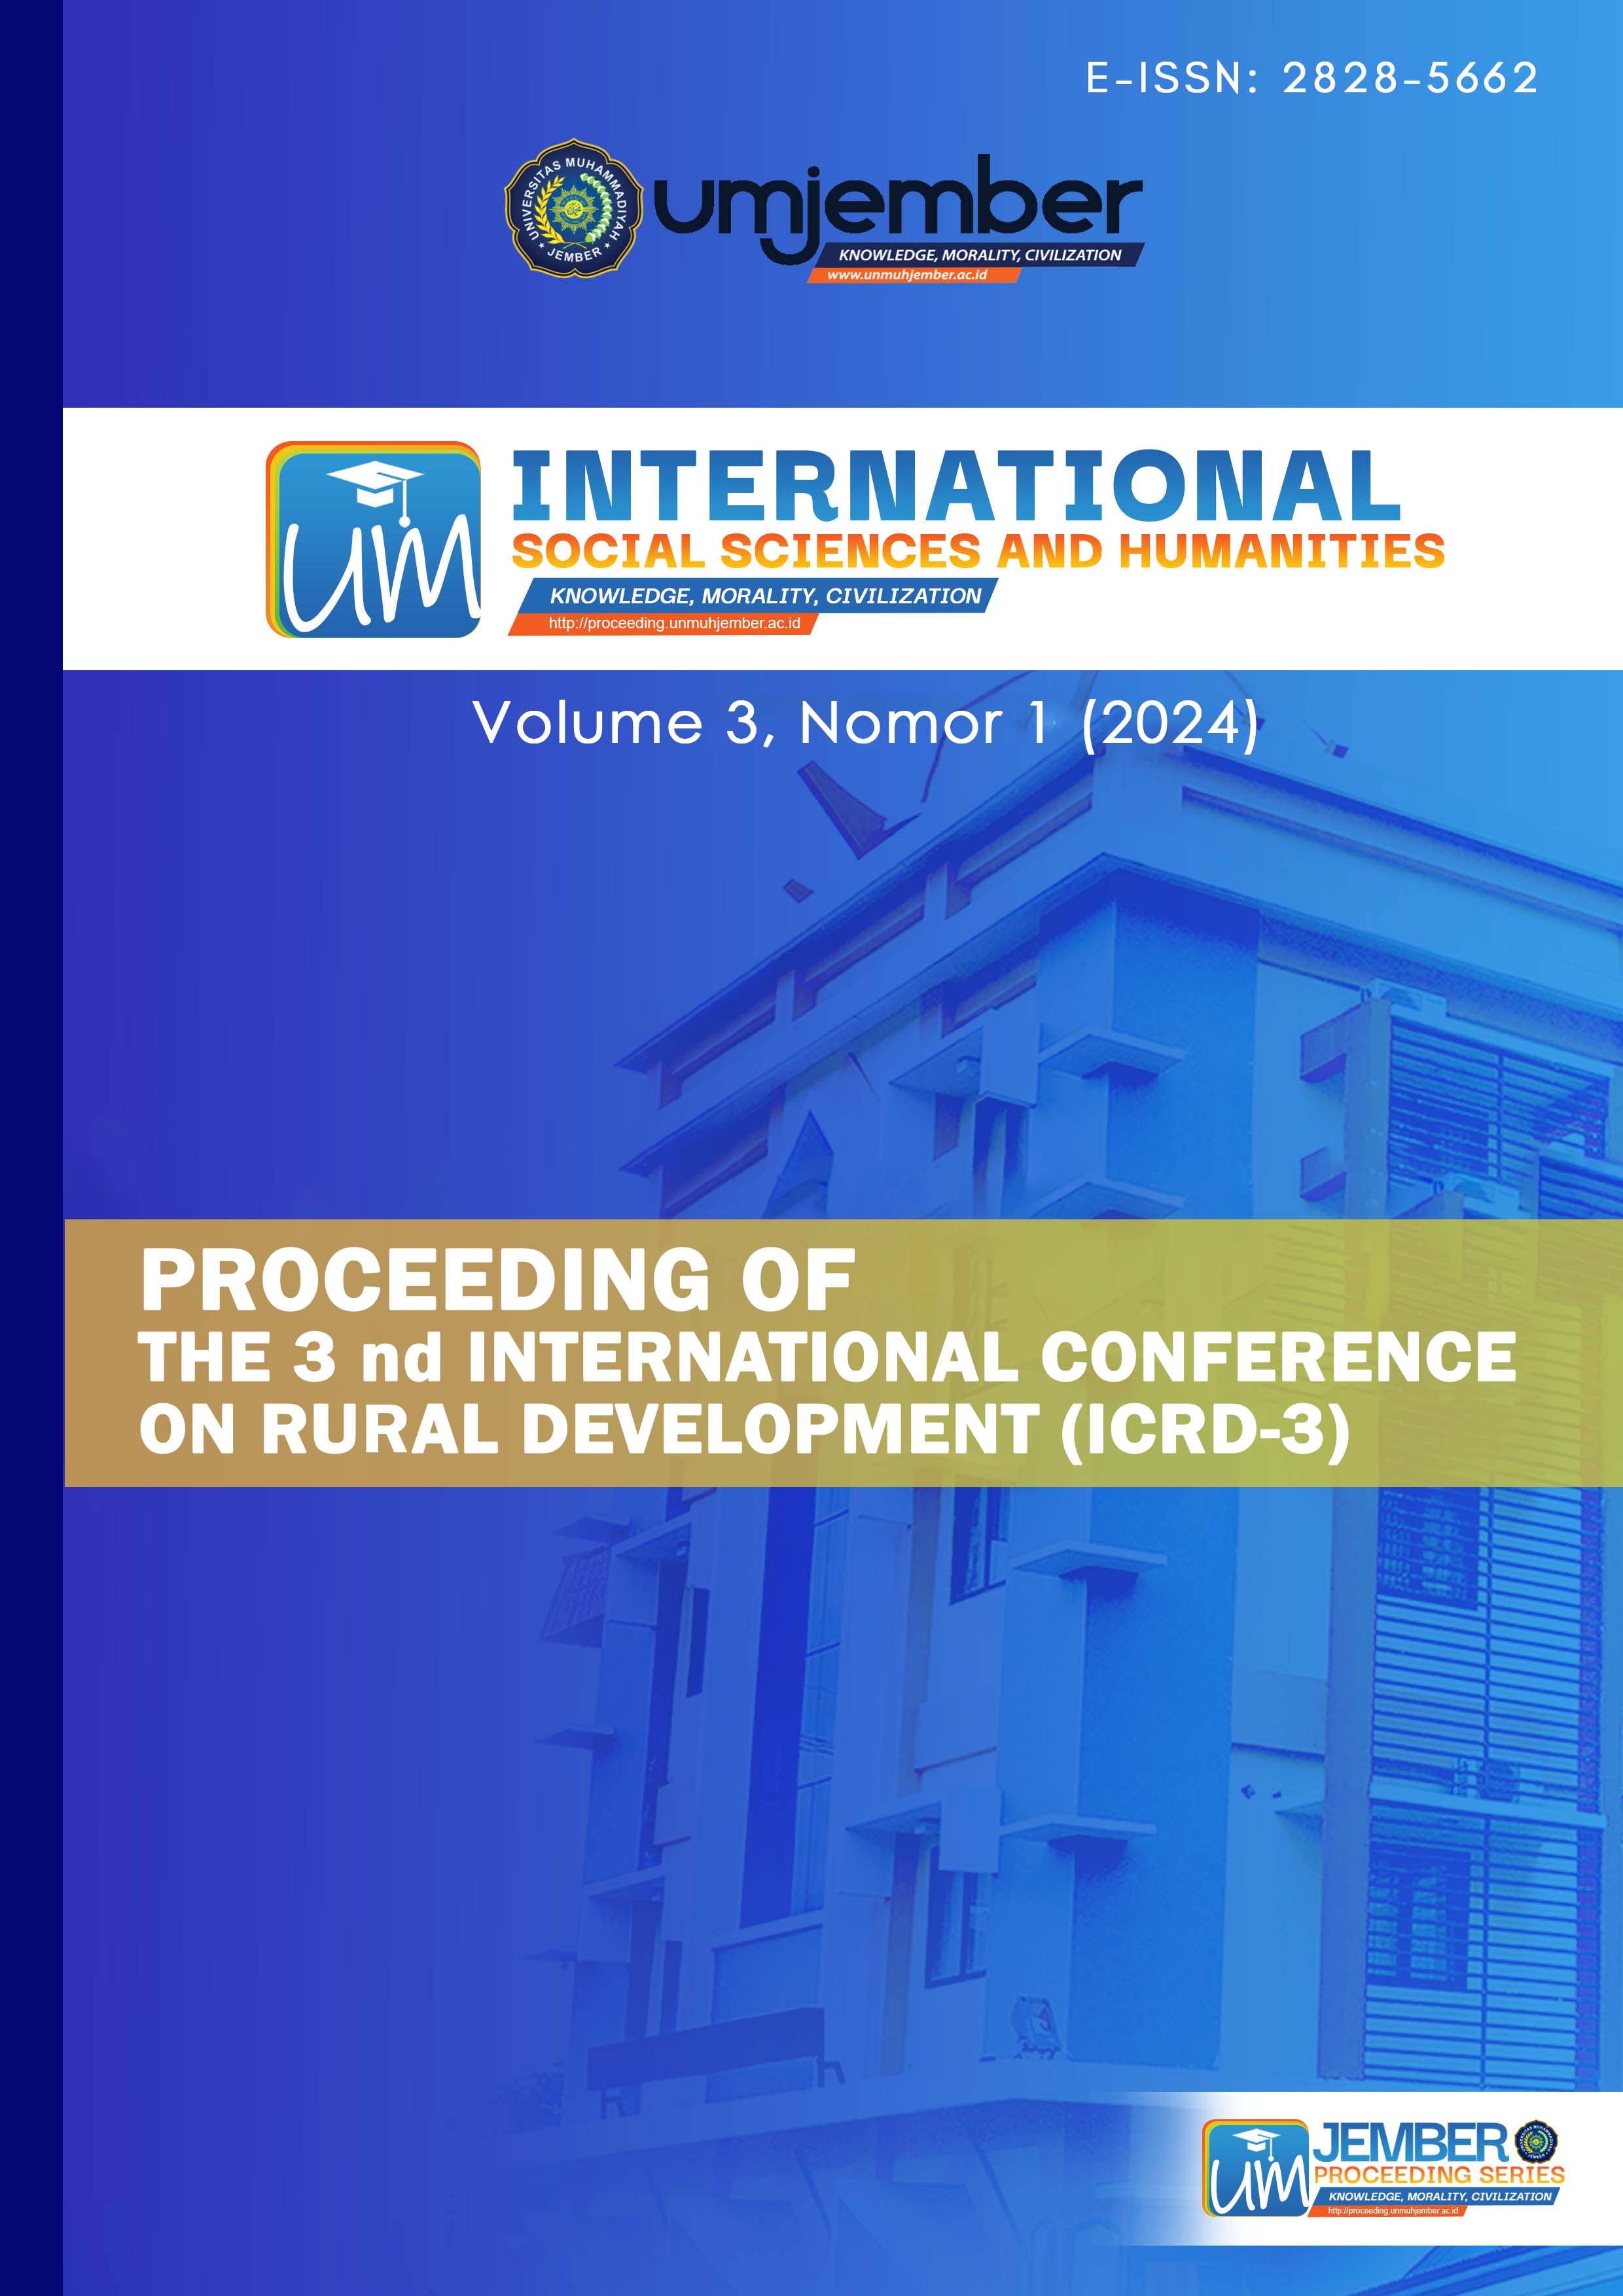 					View Vol. 3 No. 1 (2024): Proceedings of International Conference on Rural Development (ICRD) 2023
				